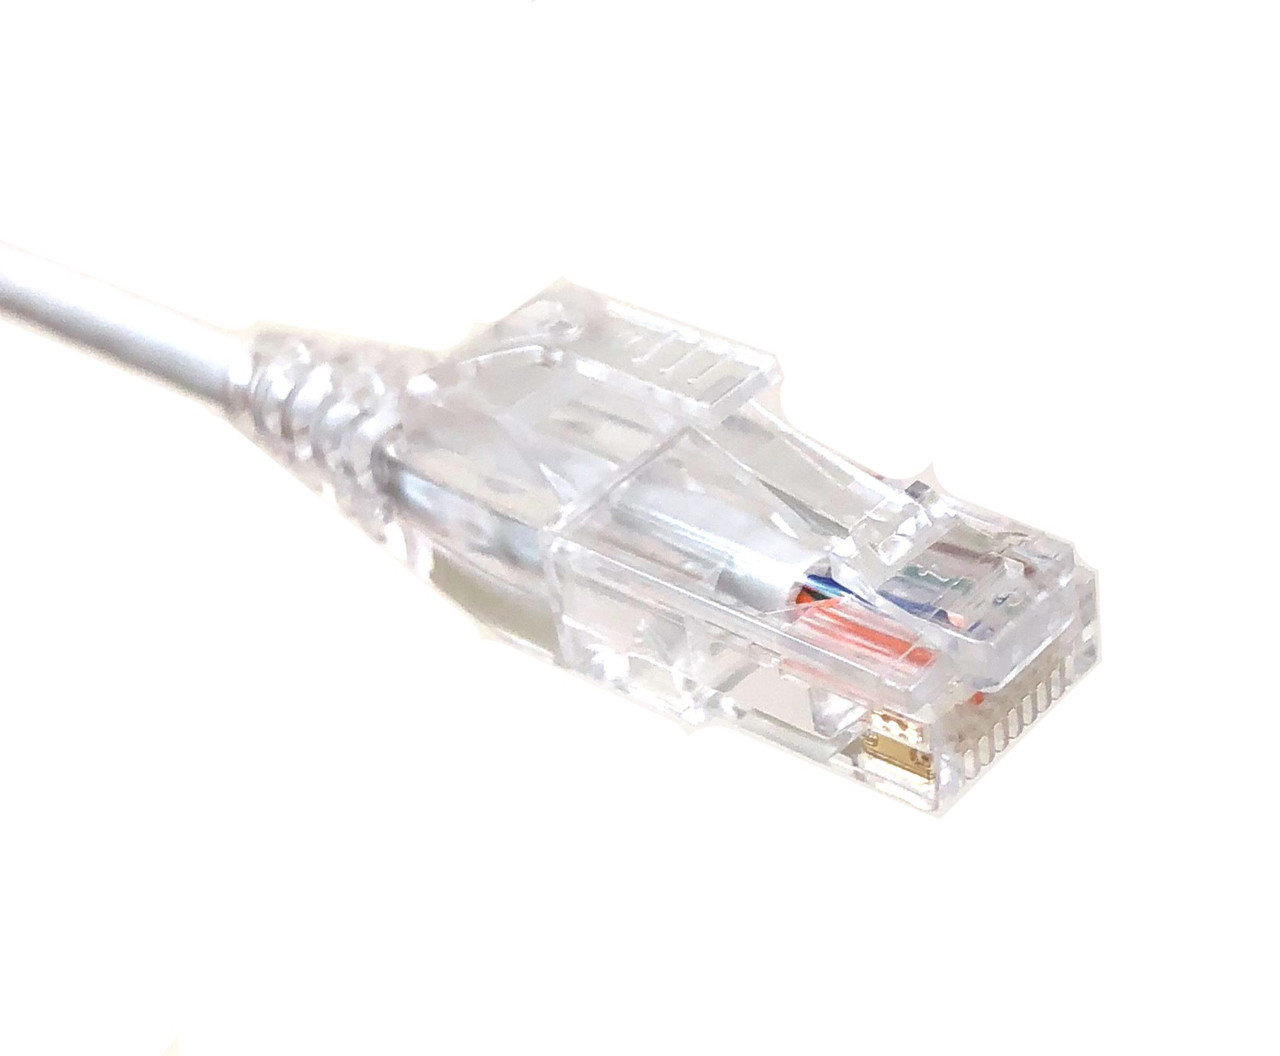 25 ft. CAT 6A 10 Gbps UTP 28 AWG Ultra Slim Ethernet Cable - White